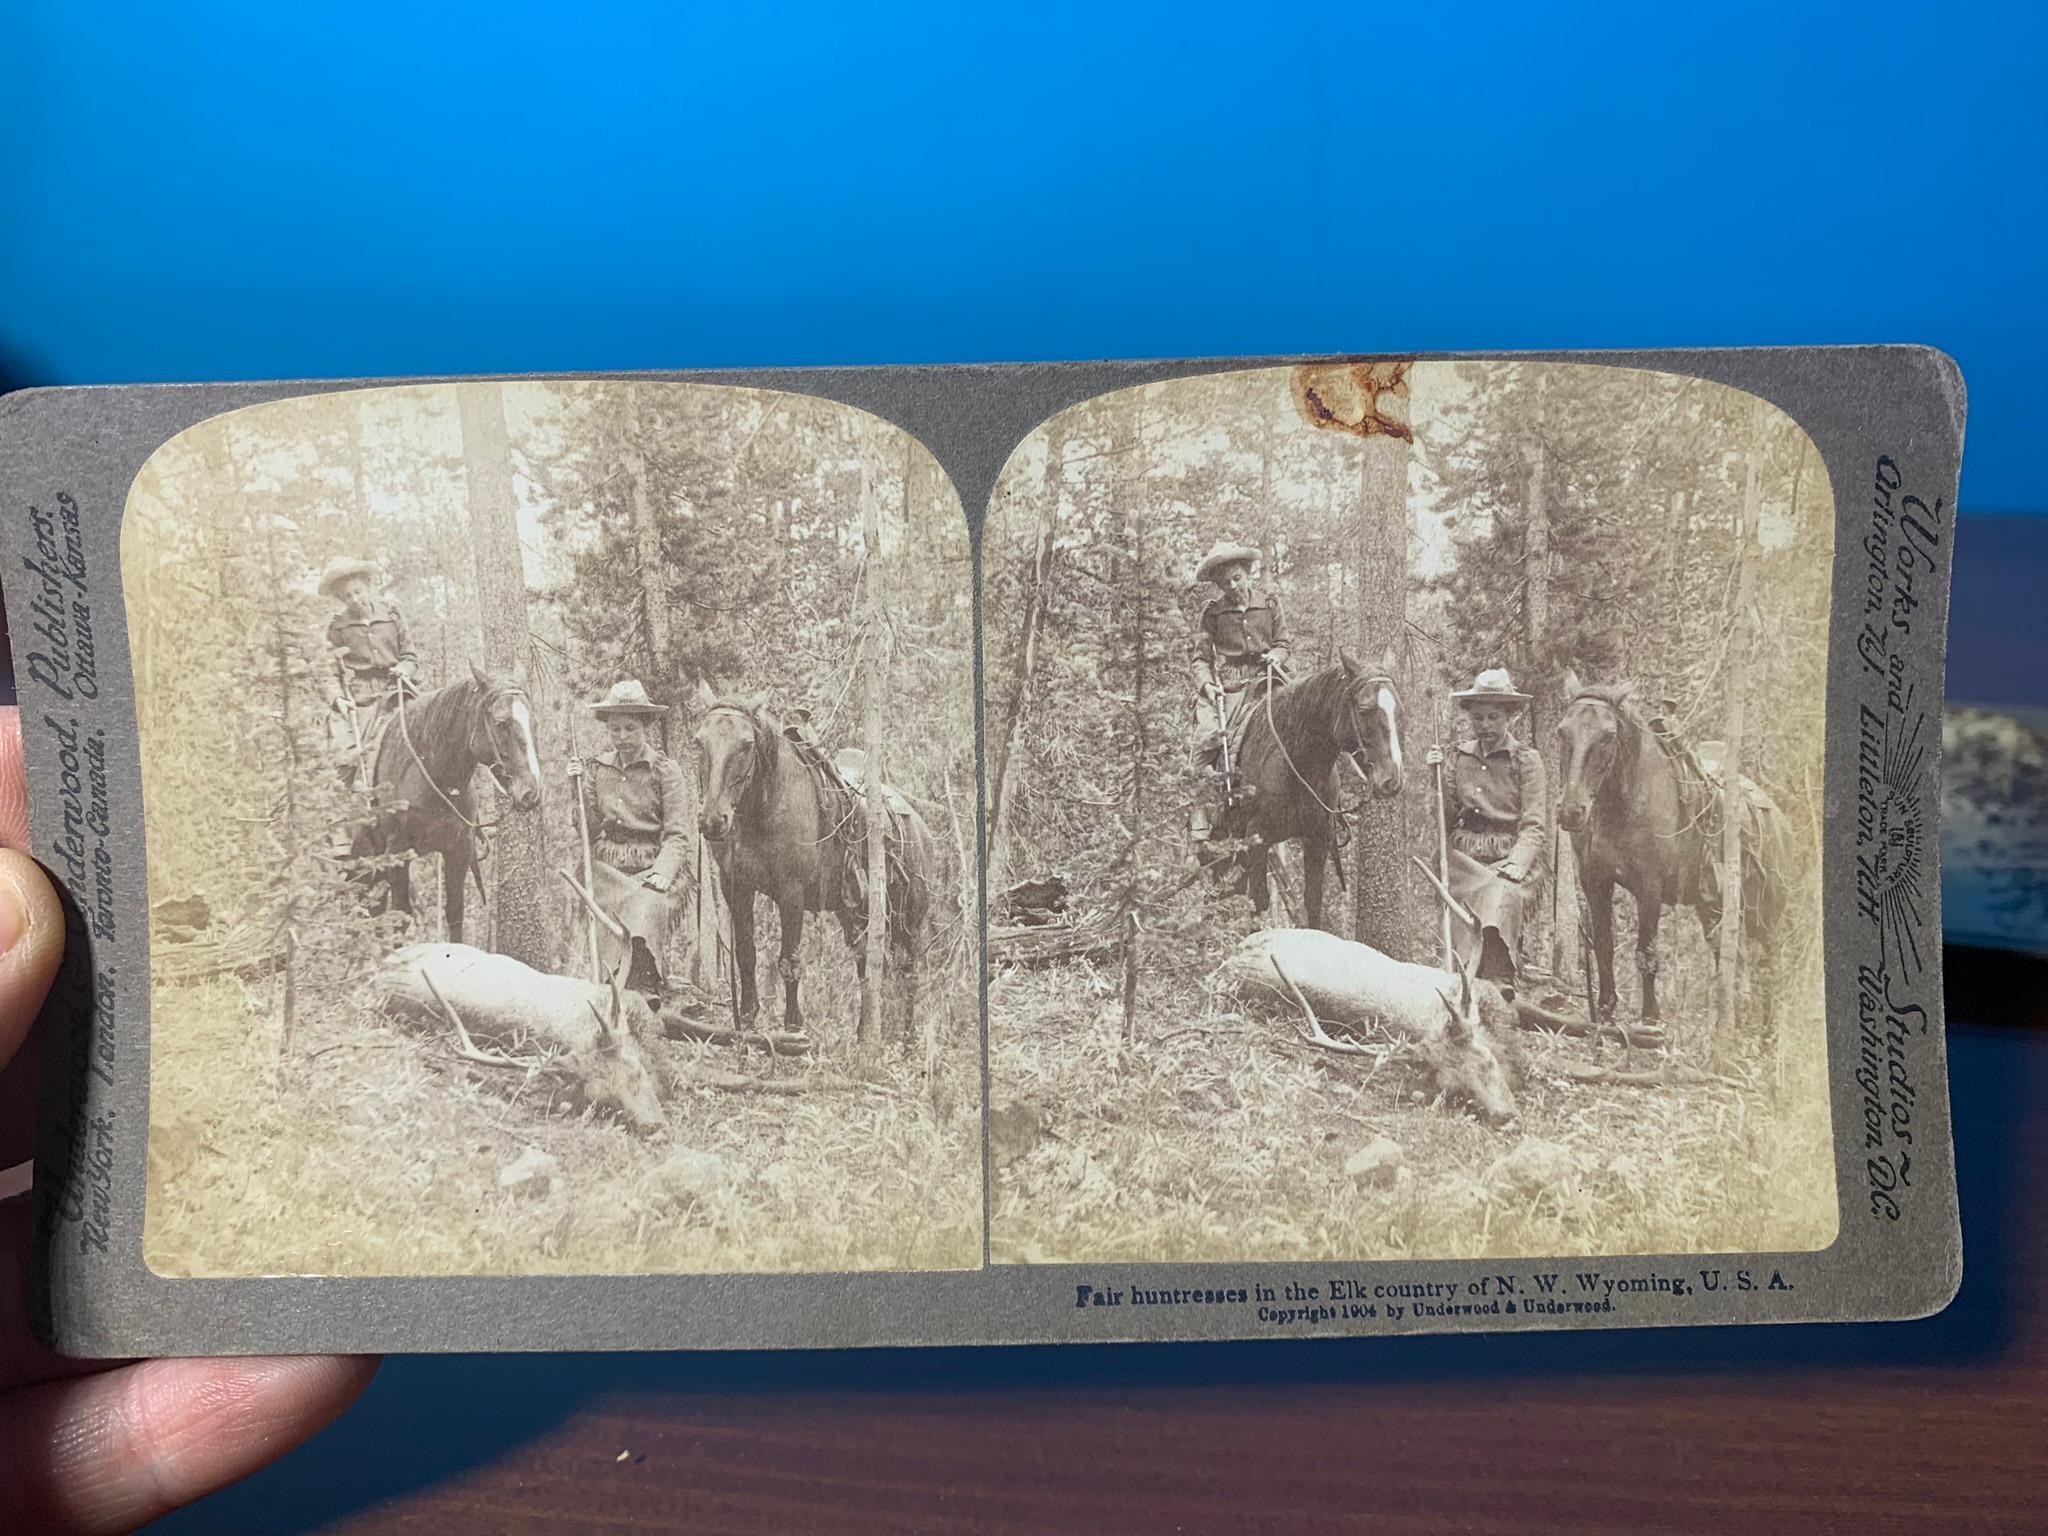 Stereoscope with Stereoview Photos